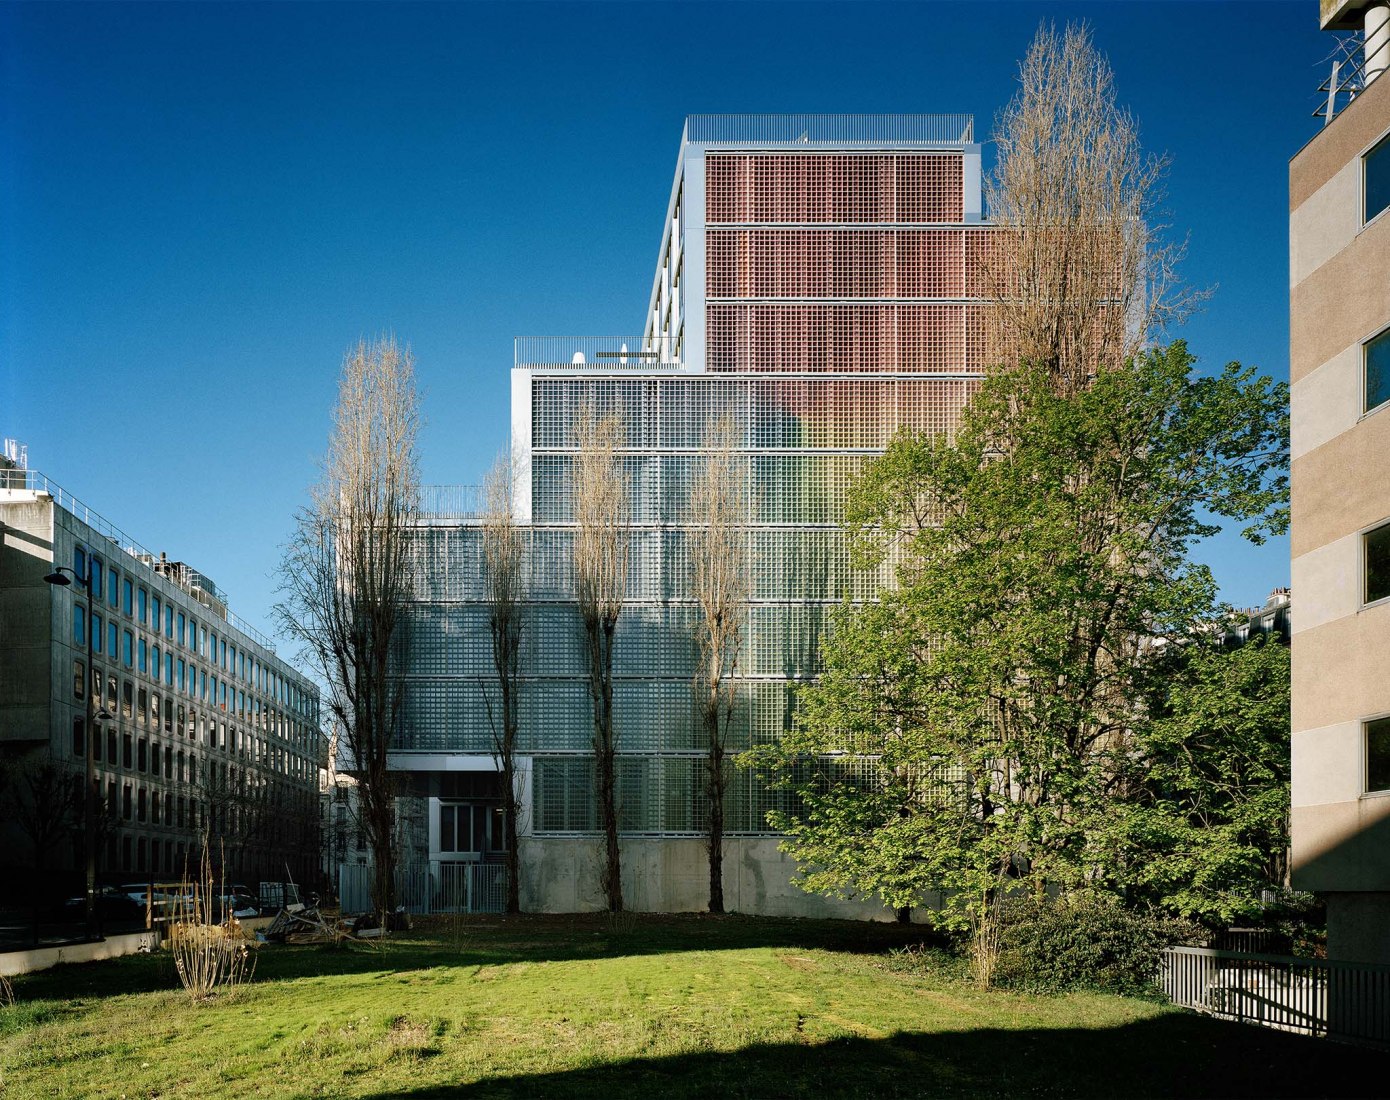 Restructuring of office building by Monsieur Vilo Bach Architecture. Photograph by Axel Dahl.